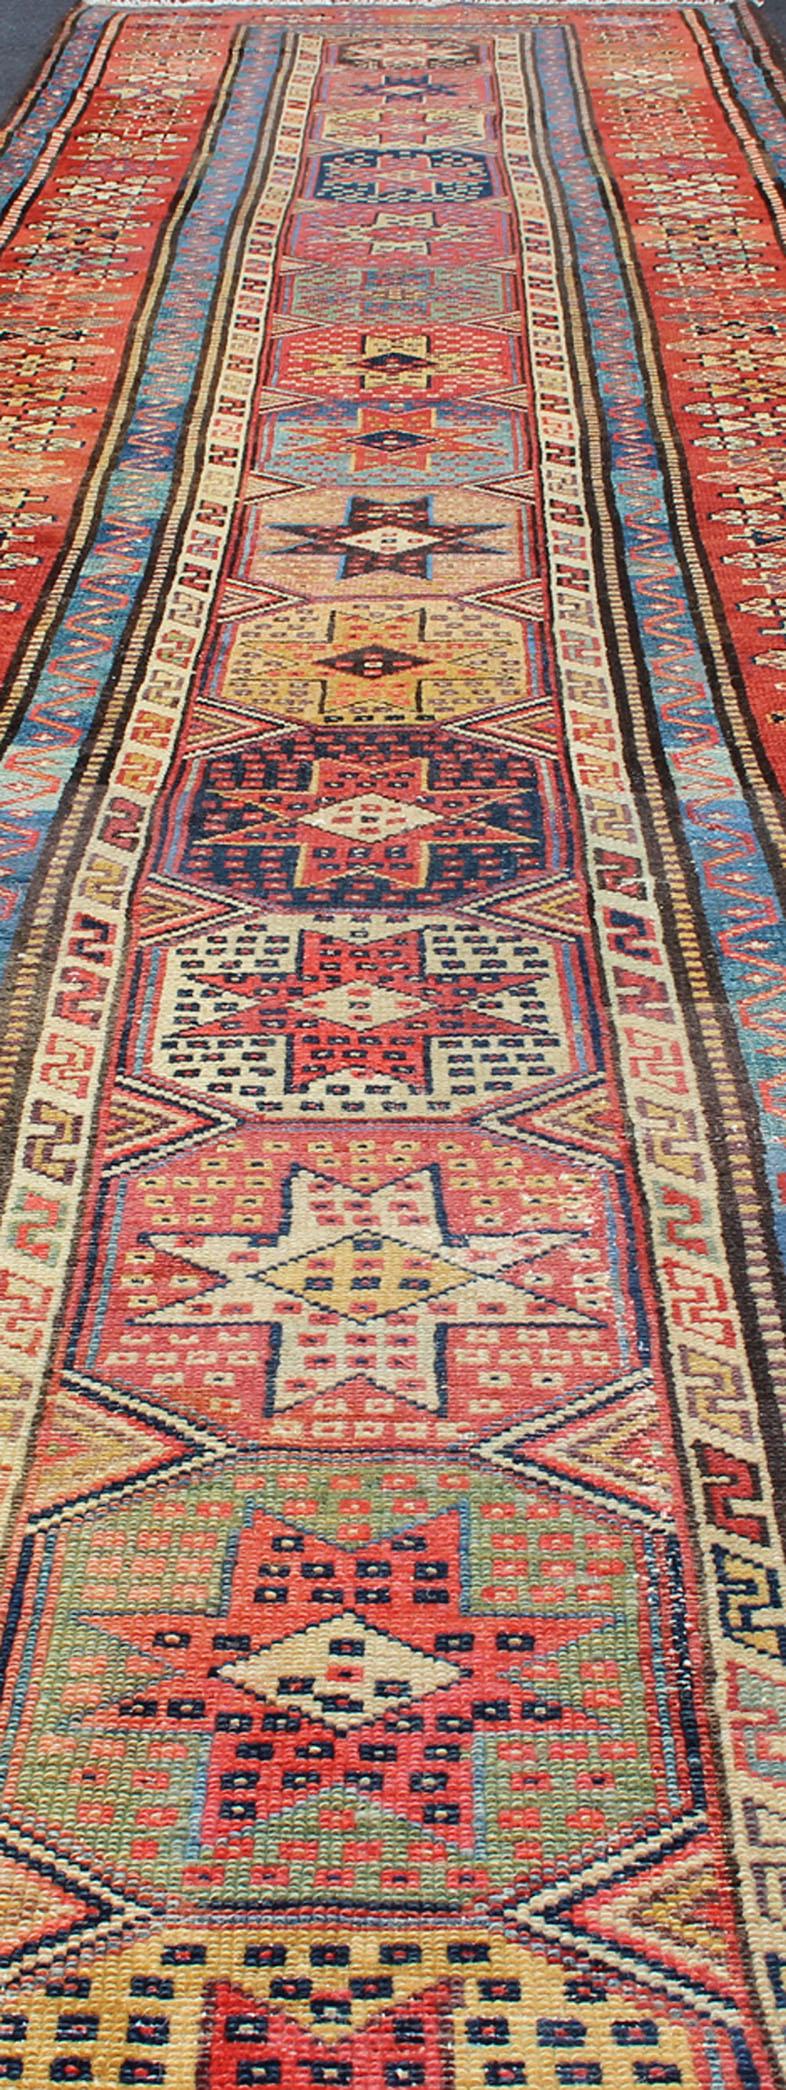 Antique Persian Kazak Runner with Medallions in Red, Blue, and Yellow In Good Condition For Sale In Atlanta, GA